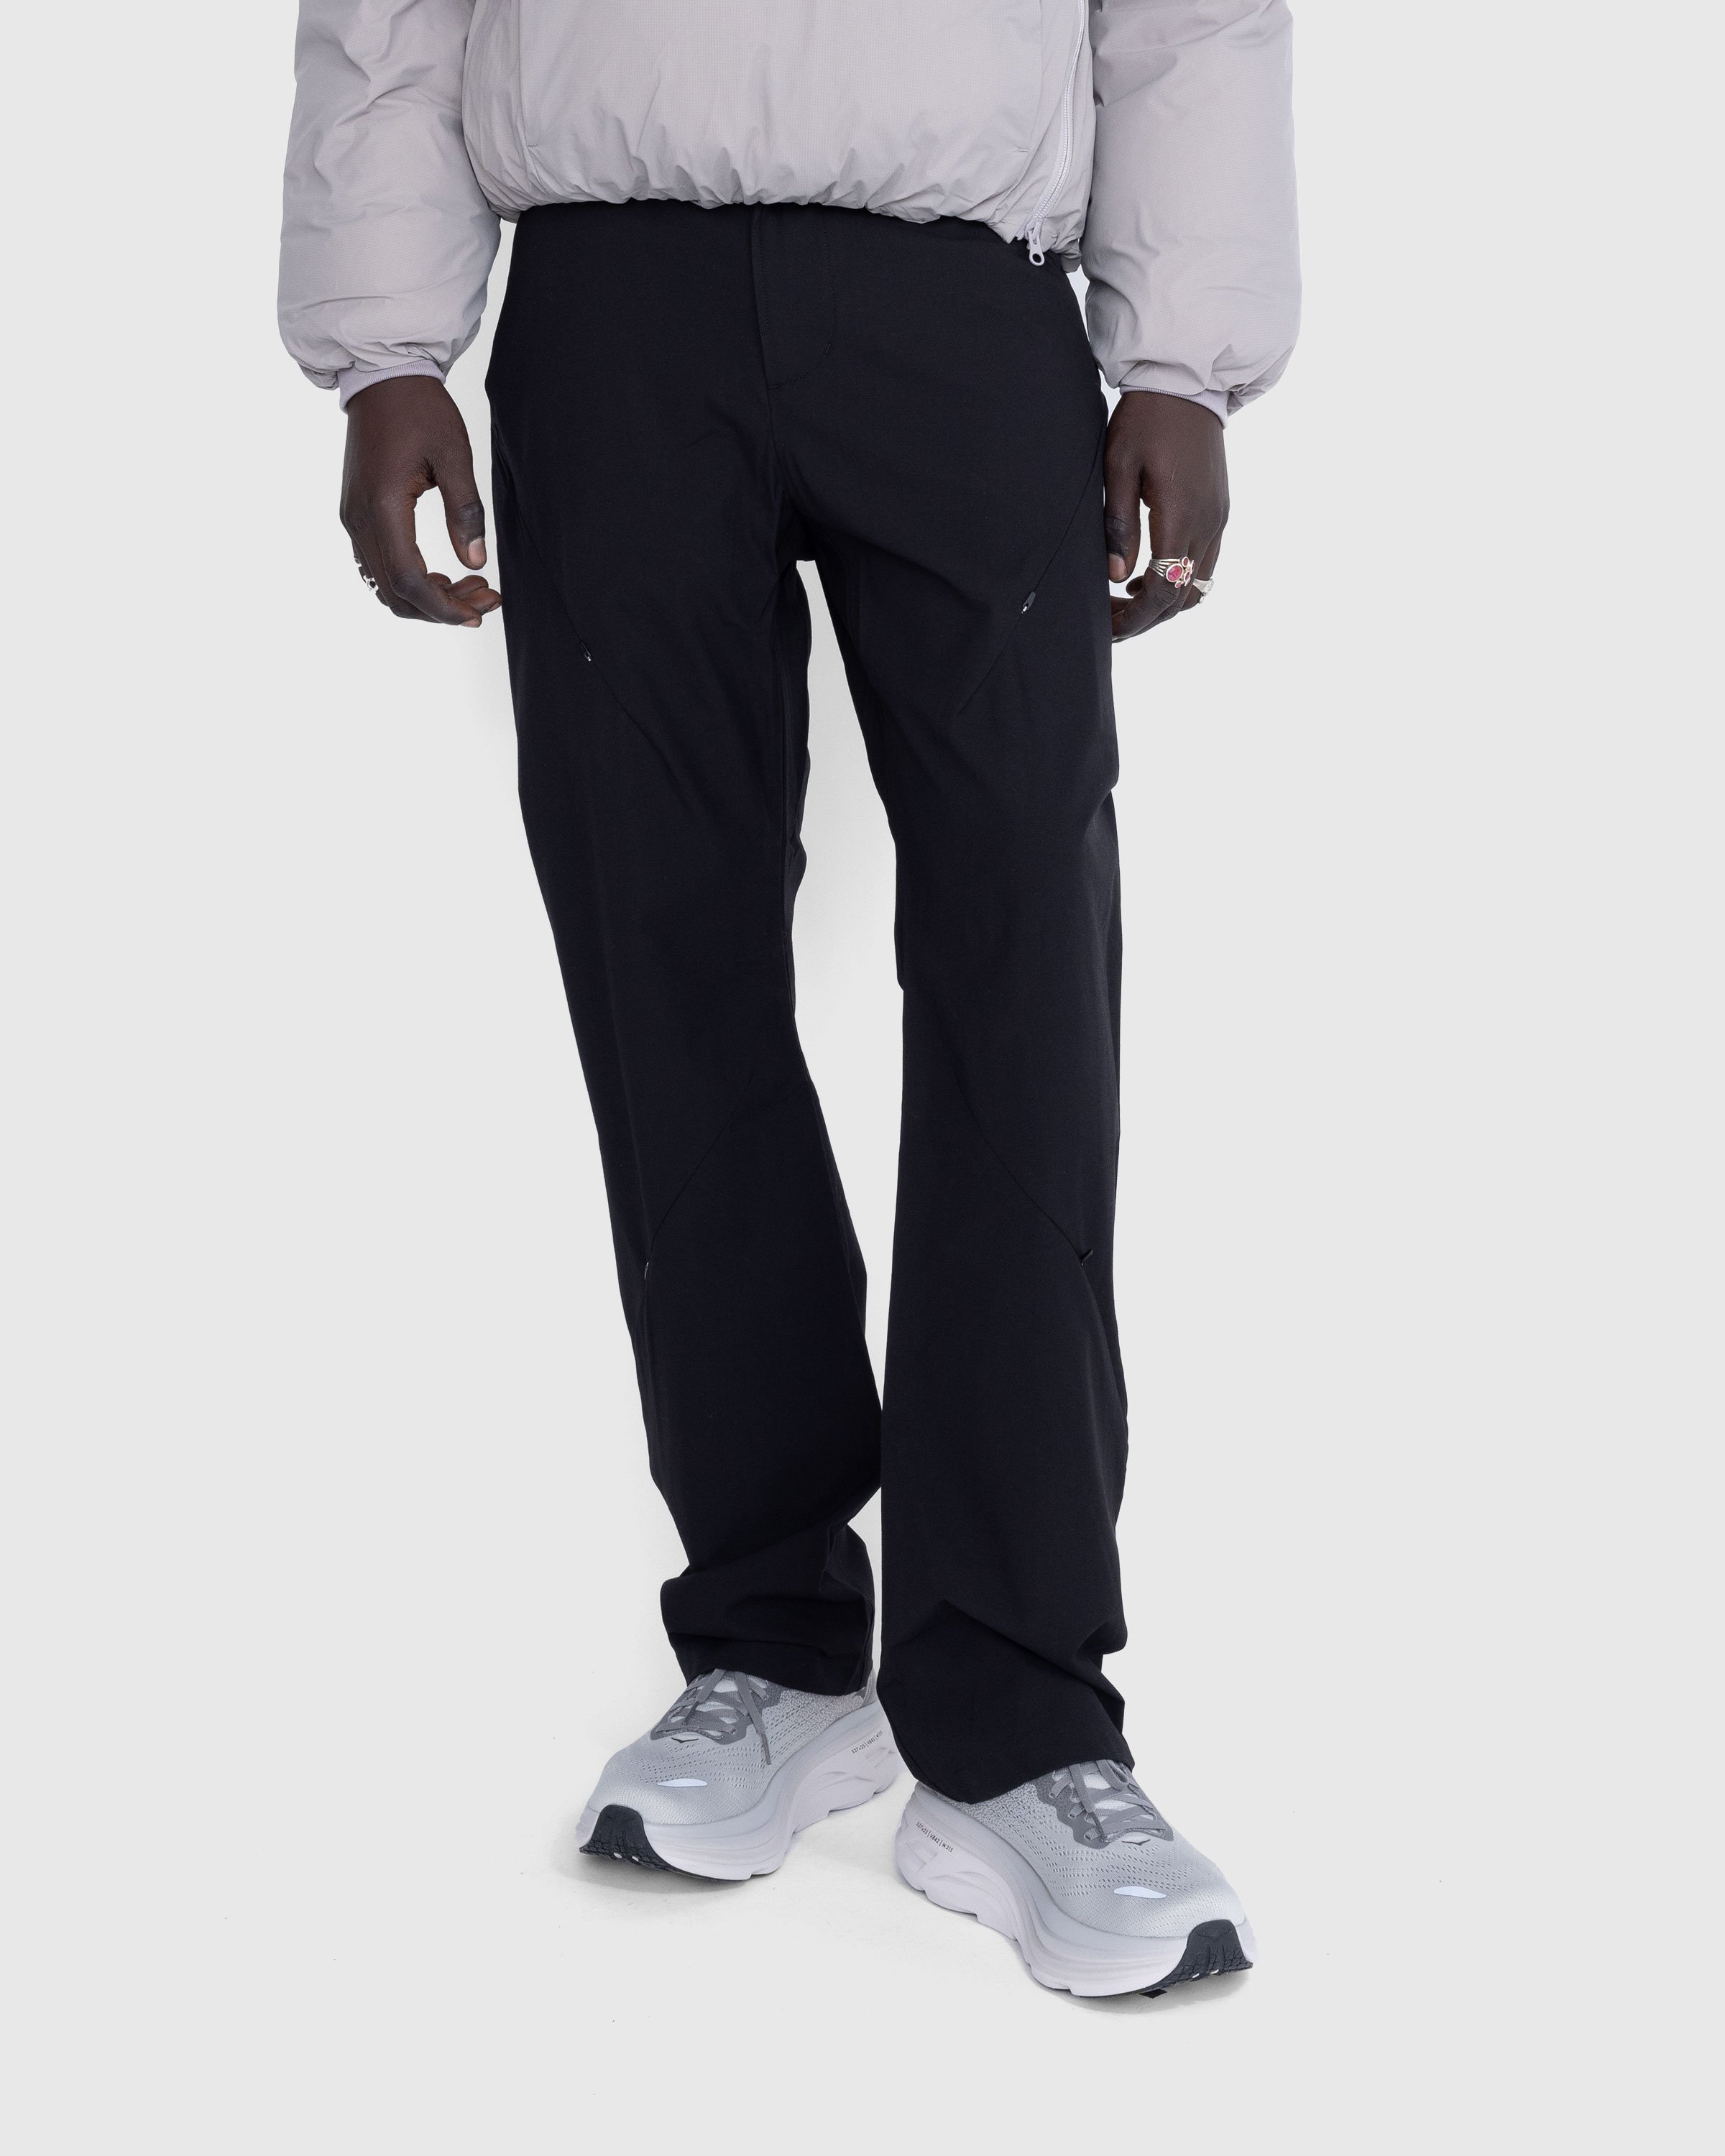 Post Archive Faction (PAF) - 5.1 Technical Pants Right Black - Clothing - Black - Image 2